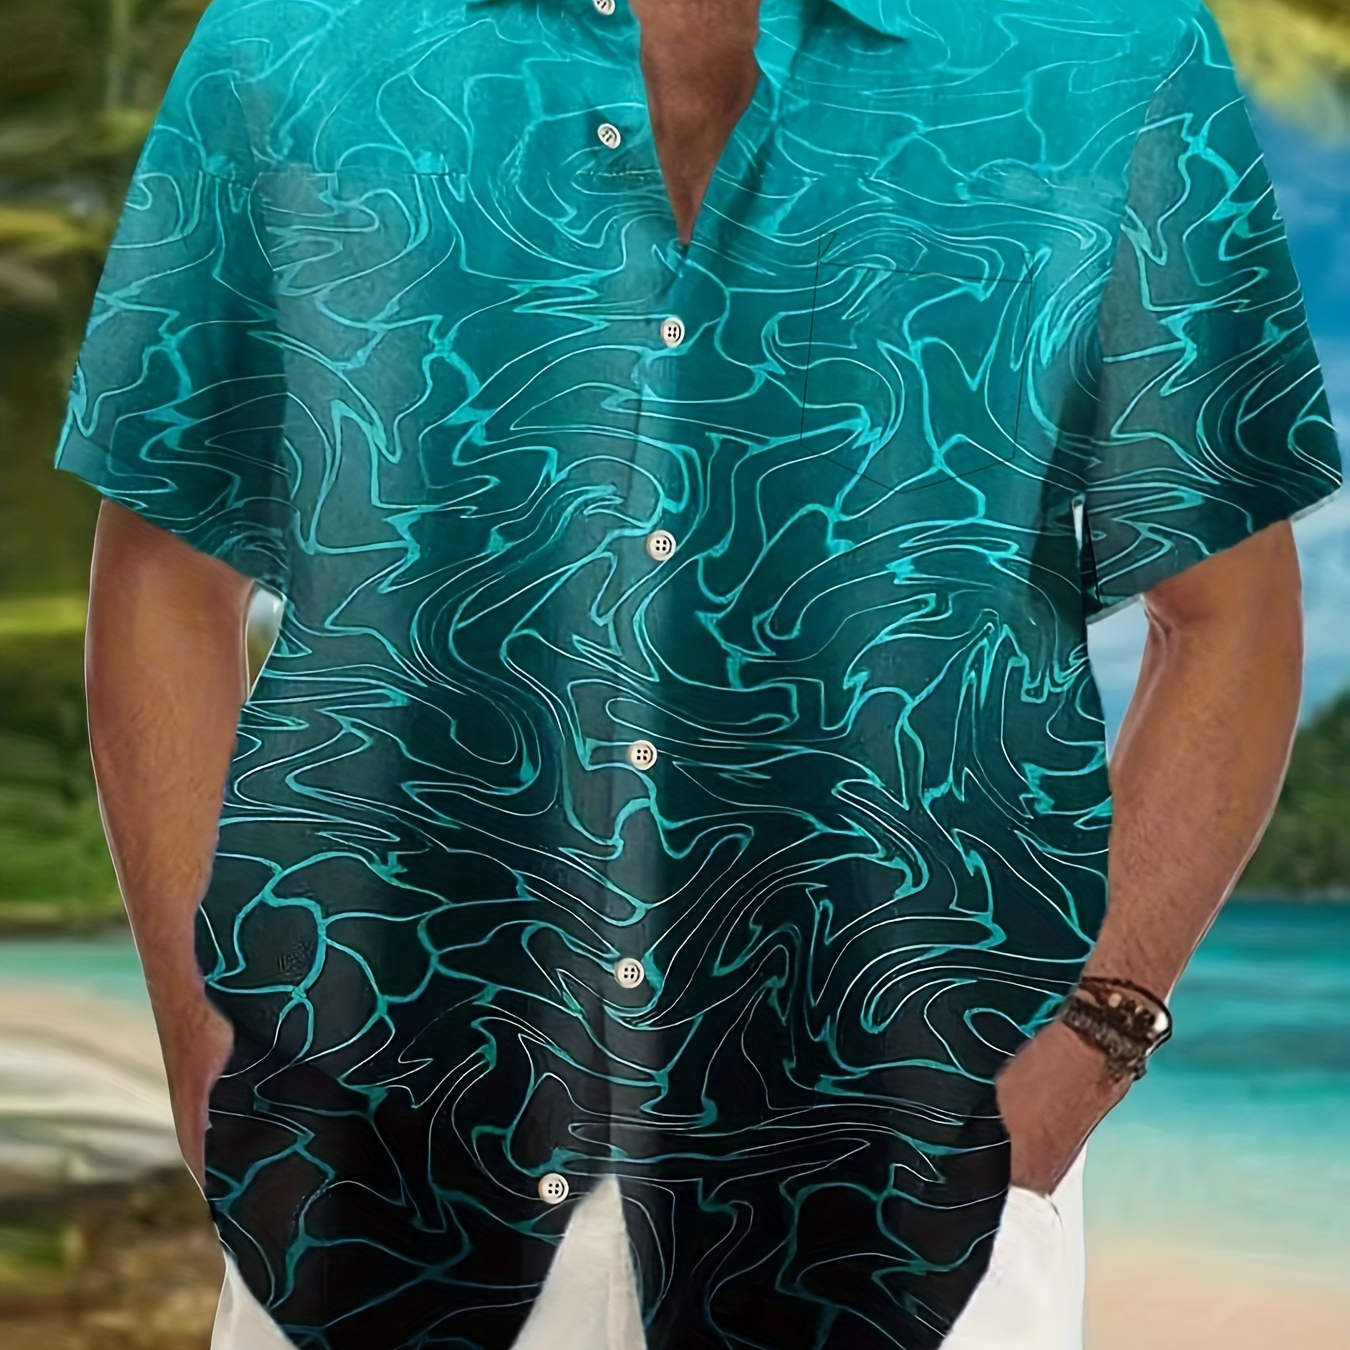 

Plus Size Men's Hawaiian Shirts For Beach, Gradient Printed Short Sleeve Aloha Shirts, Oversized Casual Loose Tops For Summer